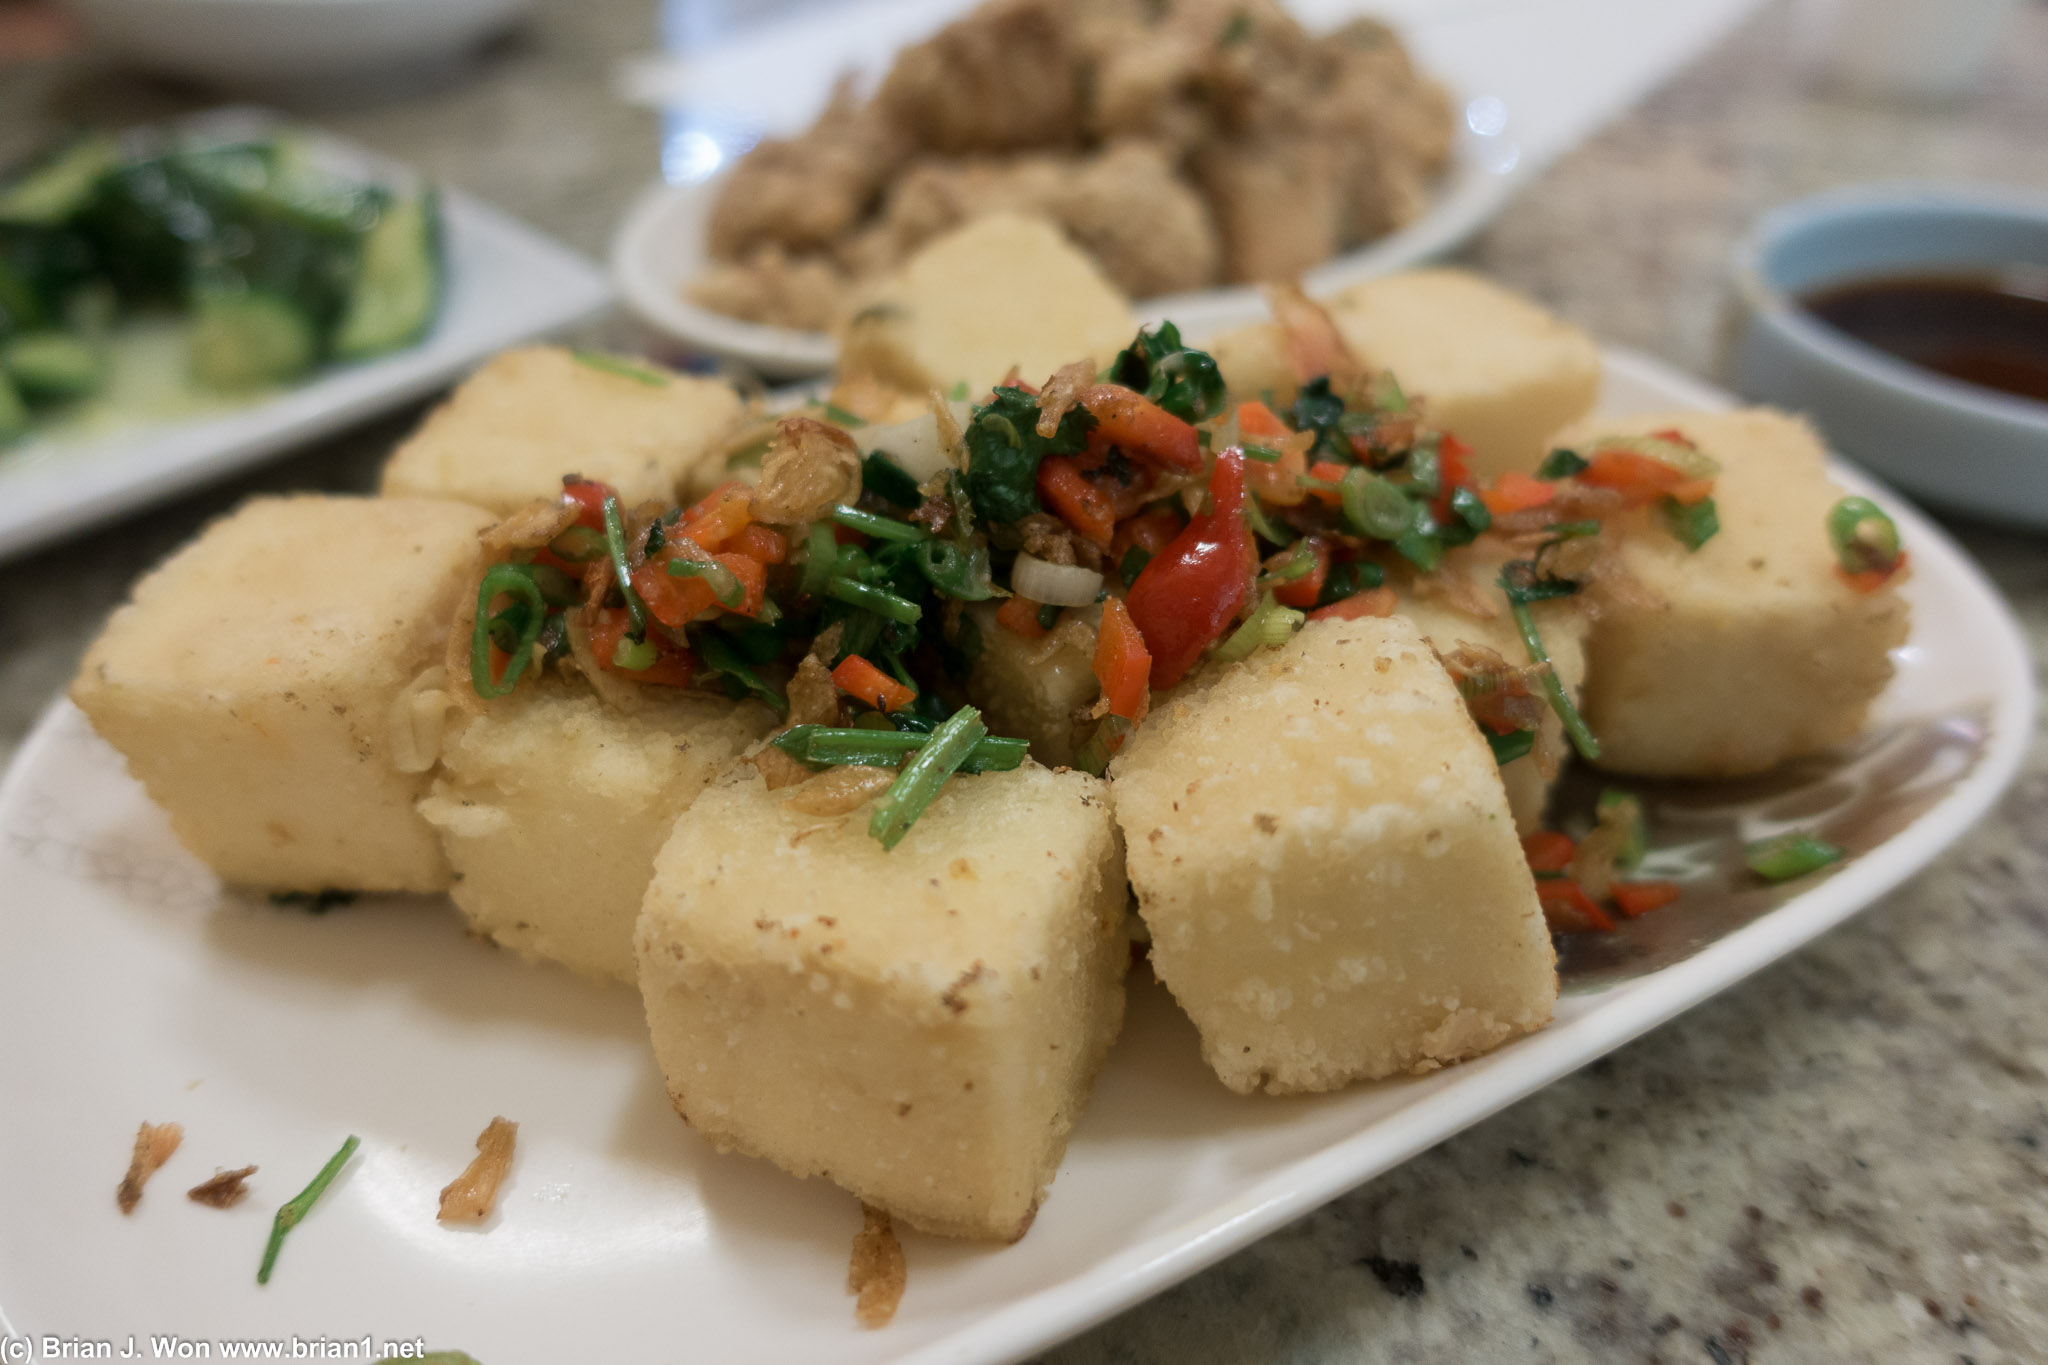 Deep fried tofu. Maybe the best item here, but that's not saying much.